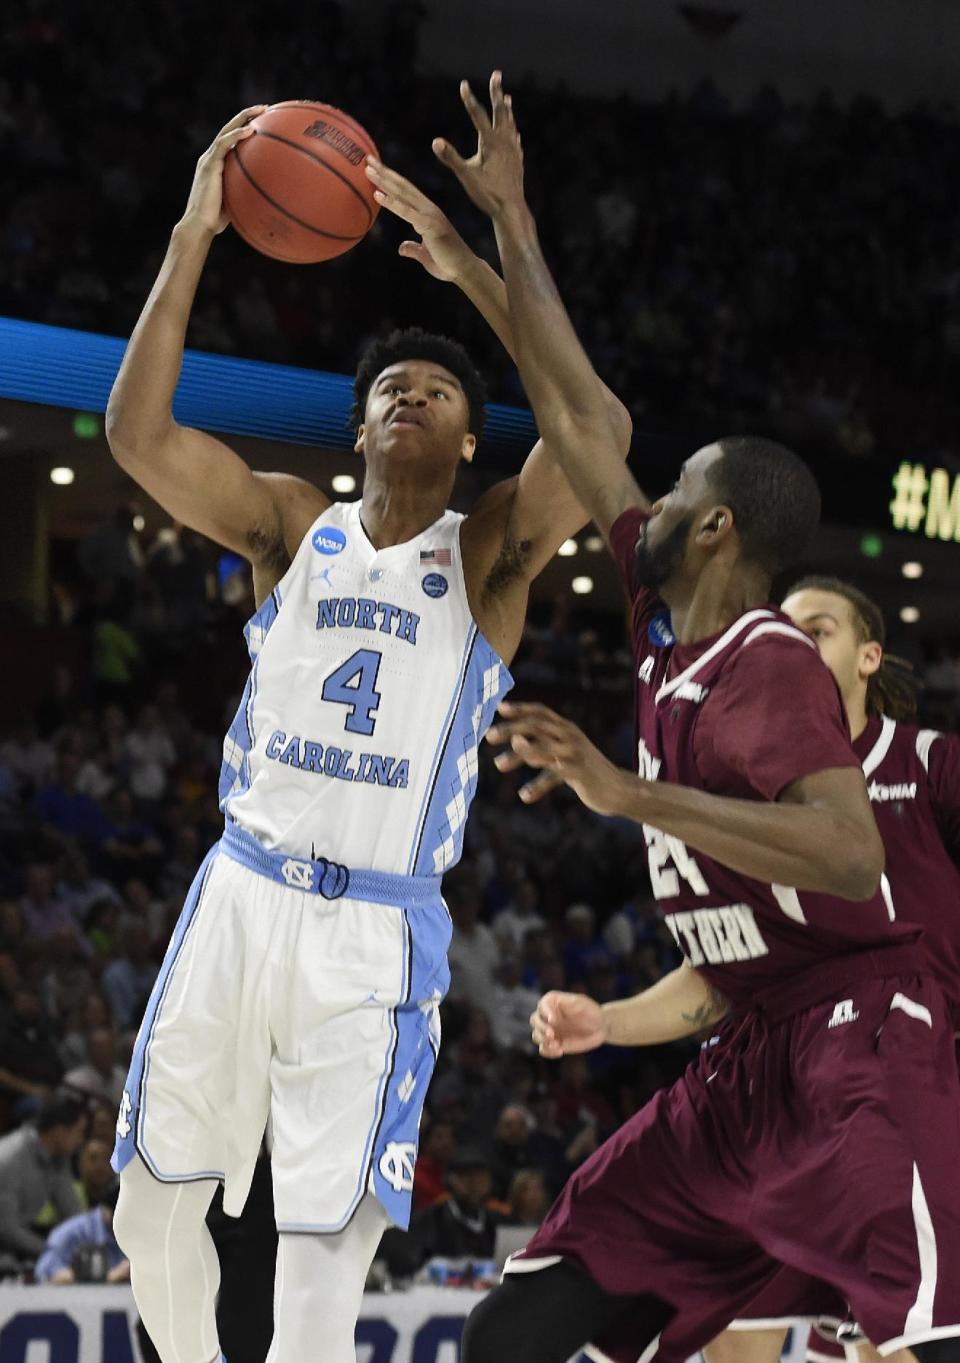 North Carolina's Isaiah Hicks (4) shoots over Texas Southern's Marvin Jones (24) during the first half in a first-round game of the NCAA men's college basketball tournament in Greenville, S.C., Friday, March 17, 2017. (AP Photo/Rainier Ehrhardt)